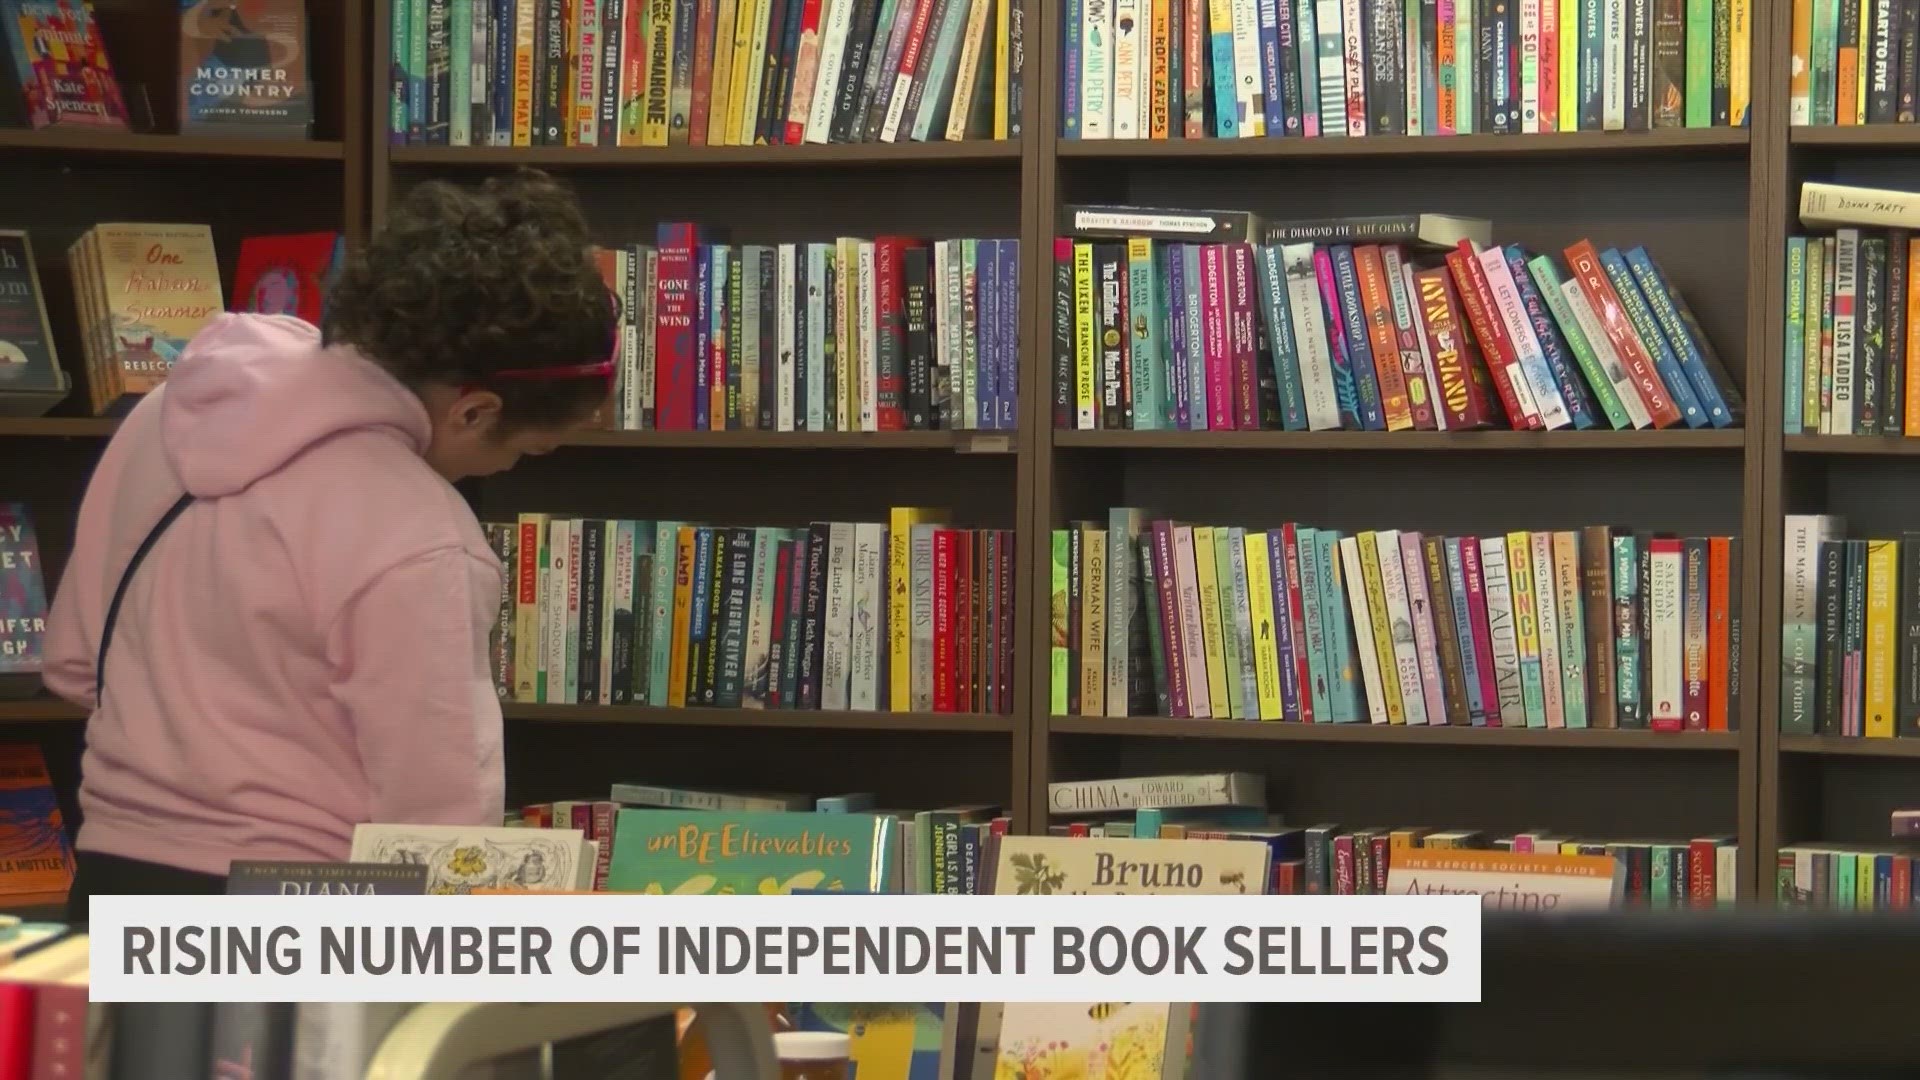 A 2020 study from Harvard University found that the number of independent bookstores was up by about 49% compared to 2009.